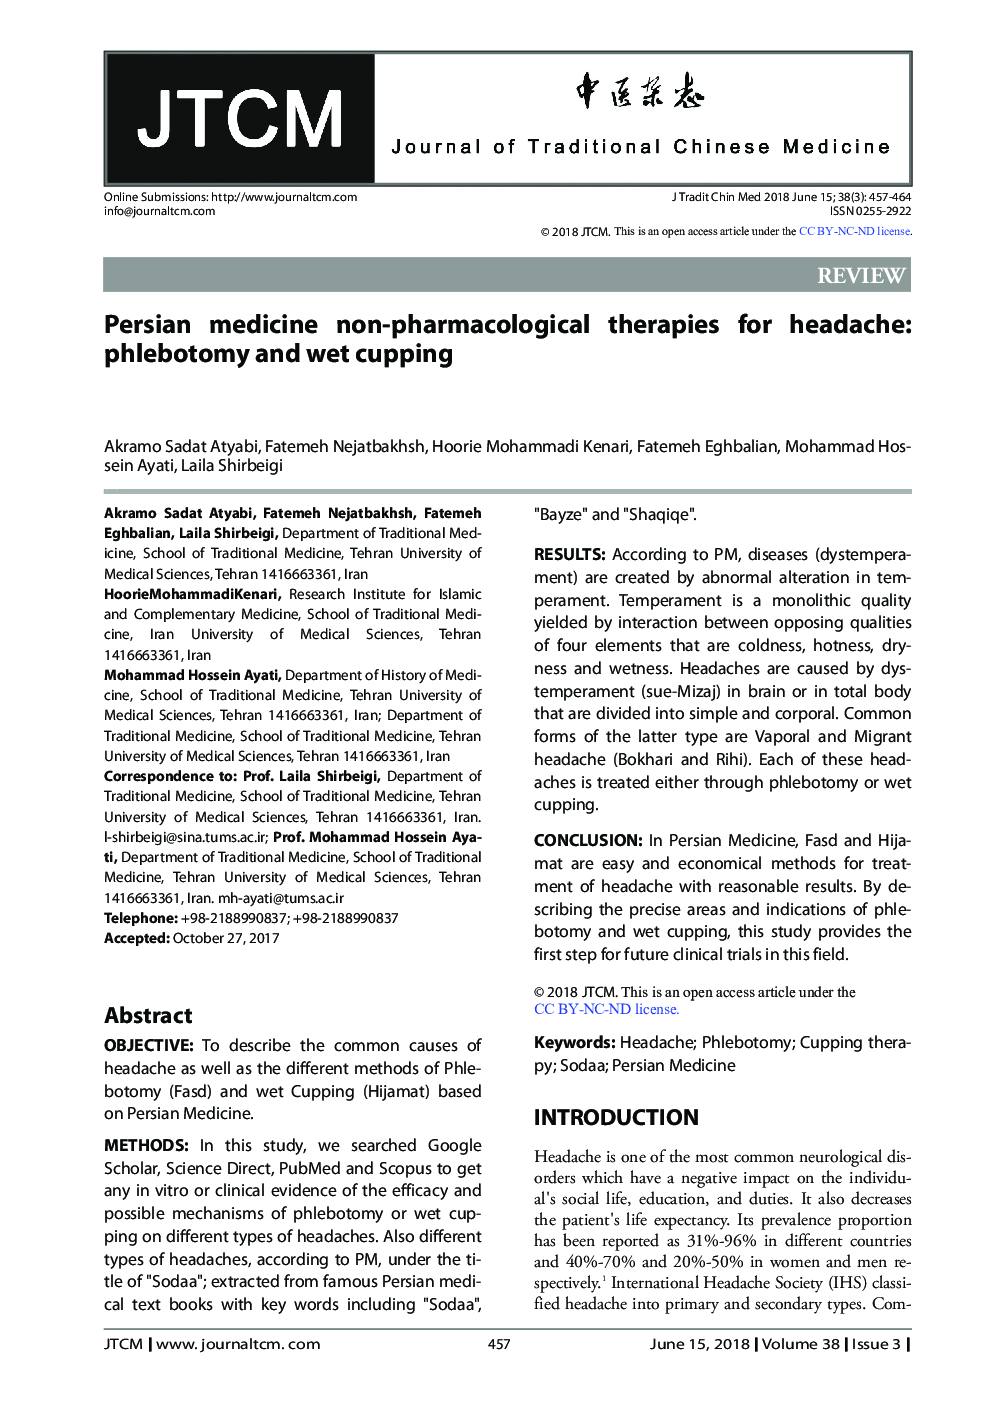 Persian medicine non-pharmacological therapies for headache: phlebotomy and wet cupping